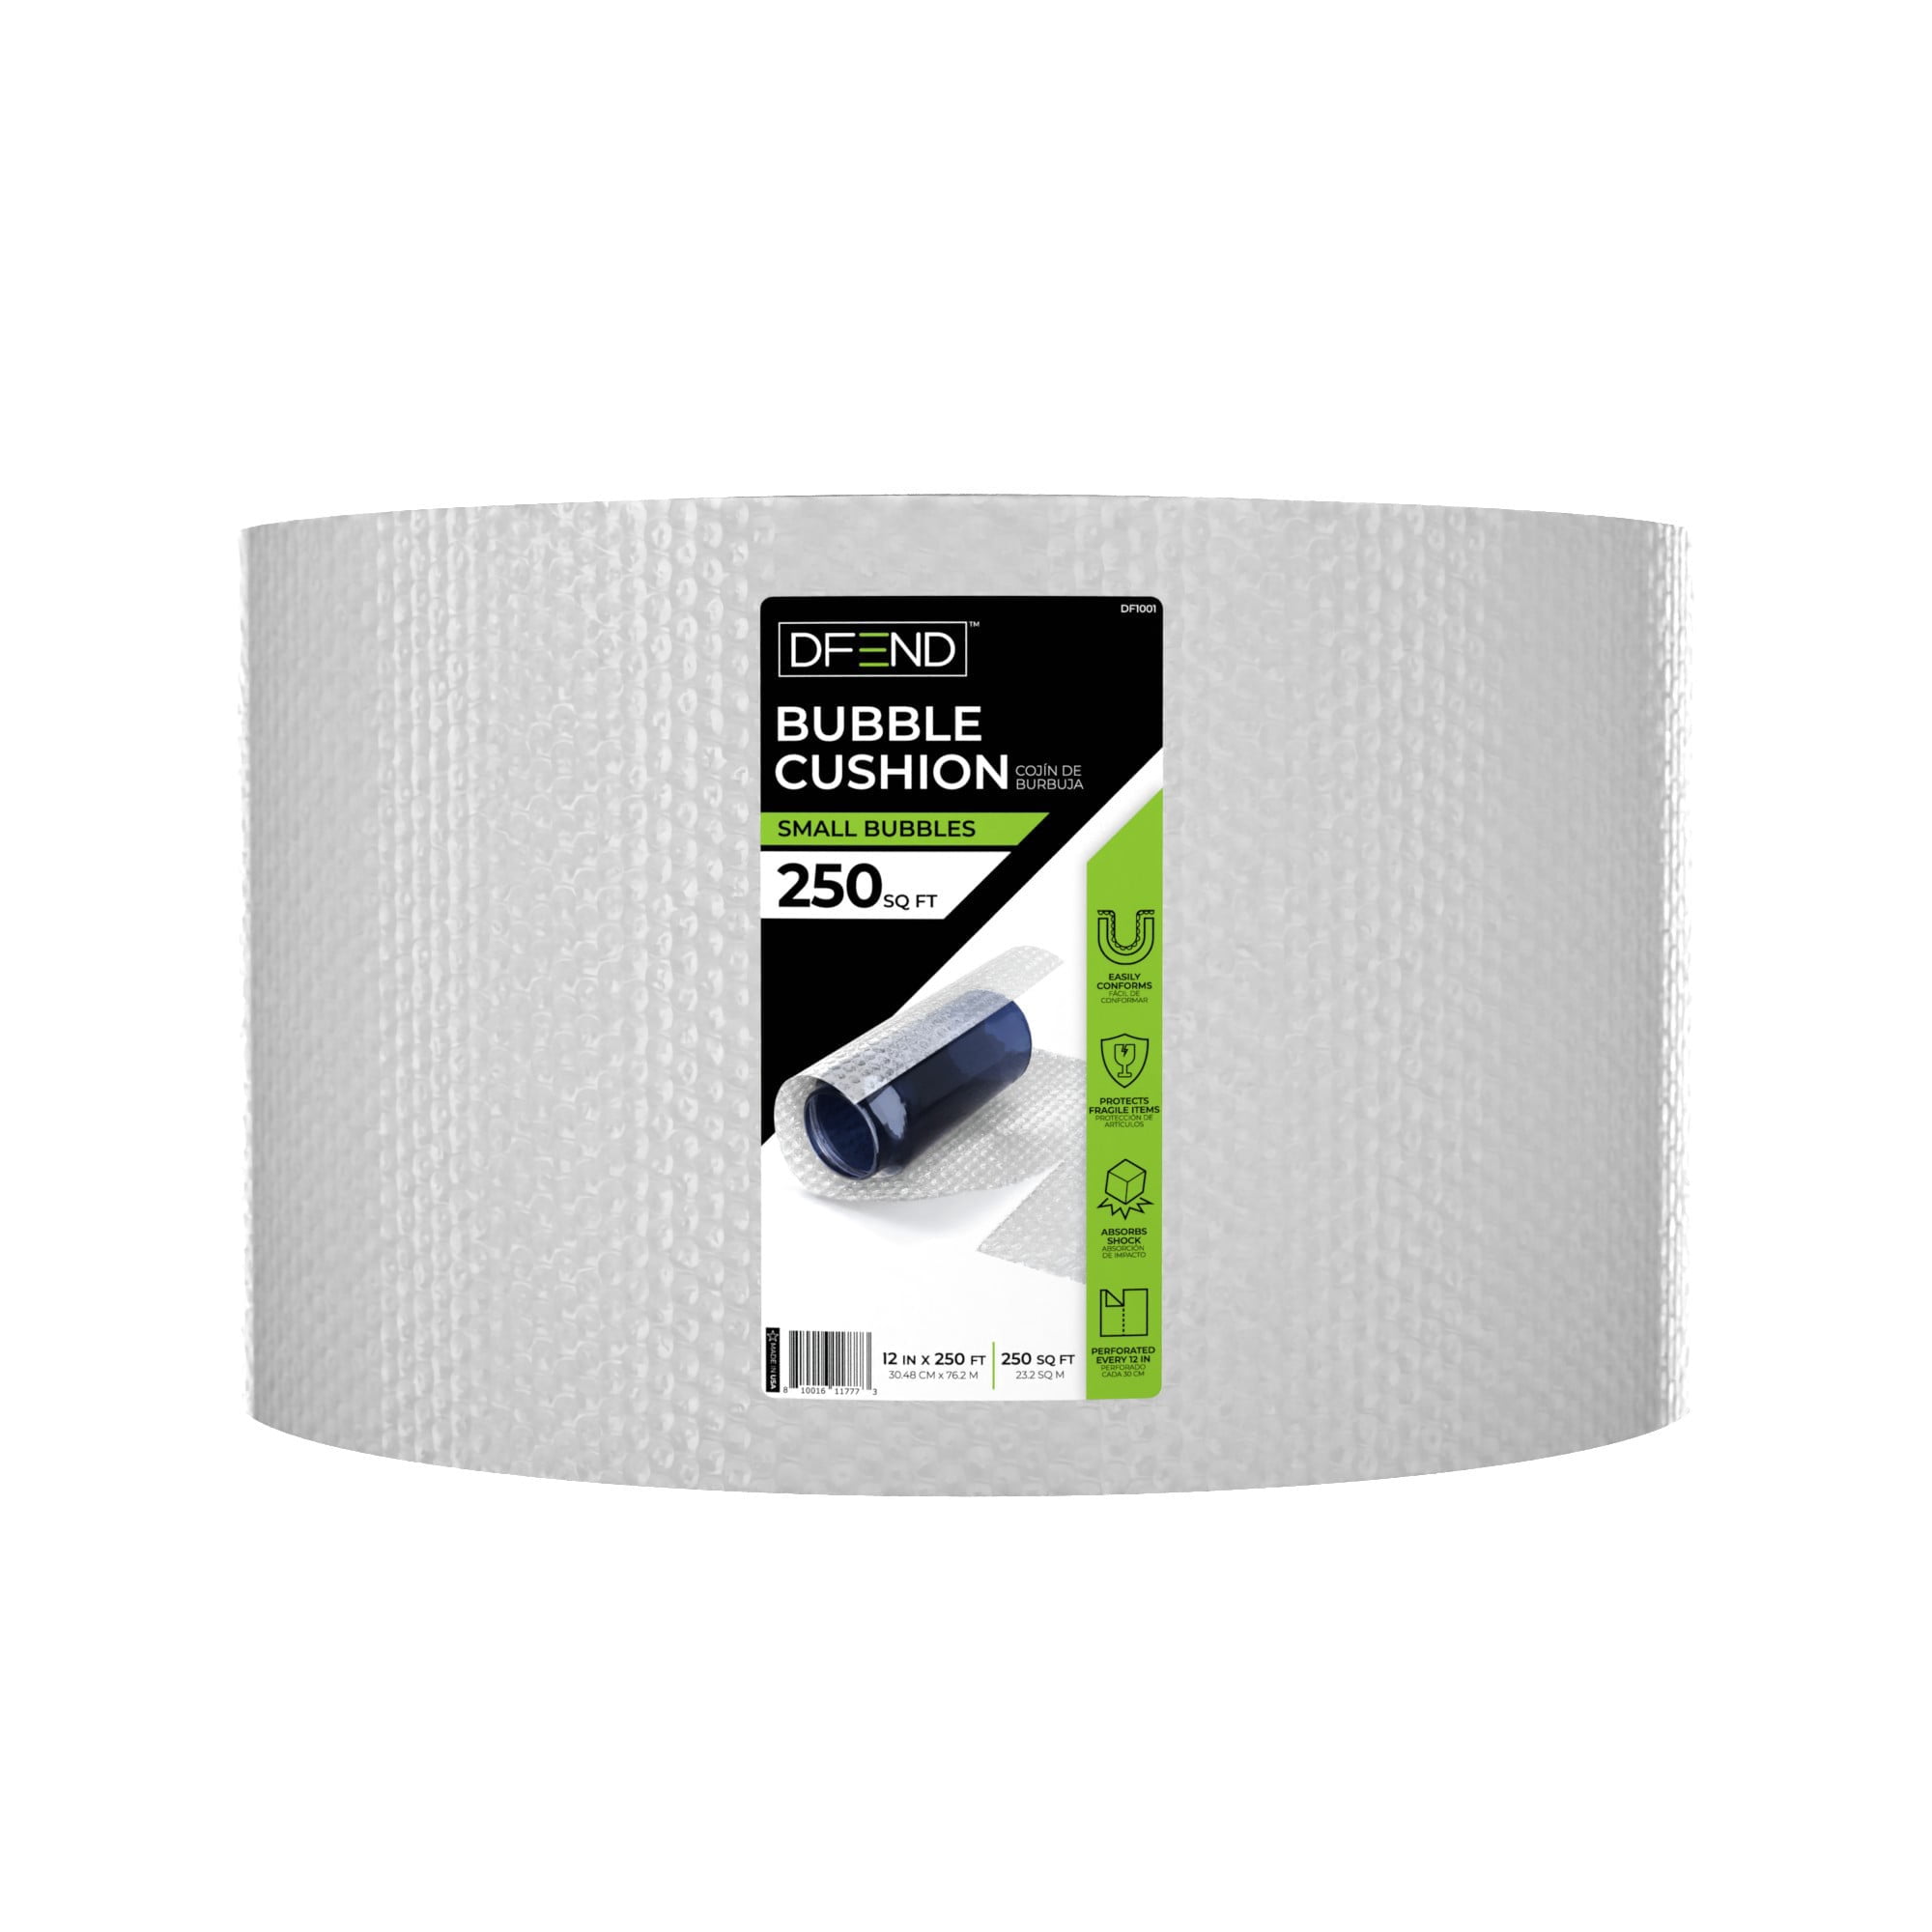 Large Bubble Wrap - 1/2 Clear (DBL), Cushioning / Paper